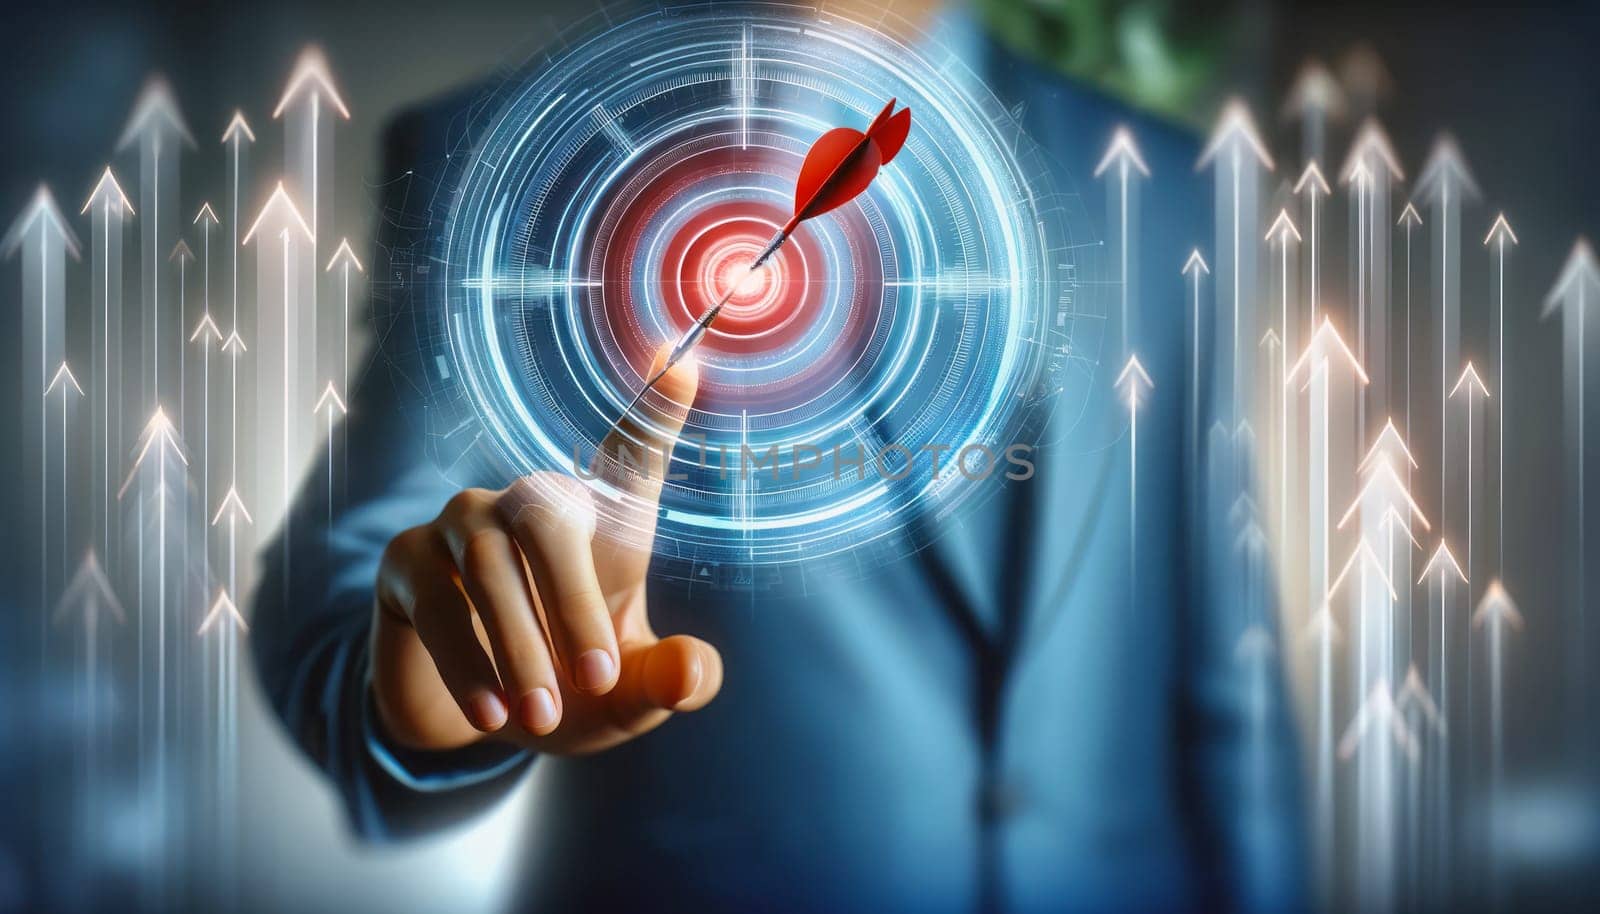 A digital illustration of a person in a blue suit interacting with a futuristic, translucent interface with a large target in the center and a red dart hitting the bullseye. Around the target, there are translucent white arrows pointing upwards, symbolizing growth or success. The person is shown from the waist up and is out of focus, with their finger touching the center of the target, on a blurred background.